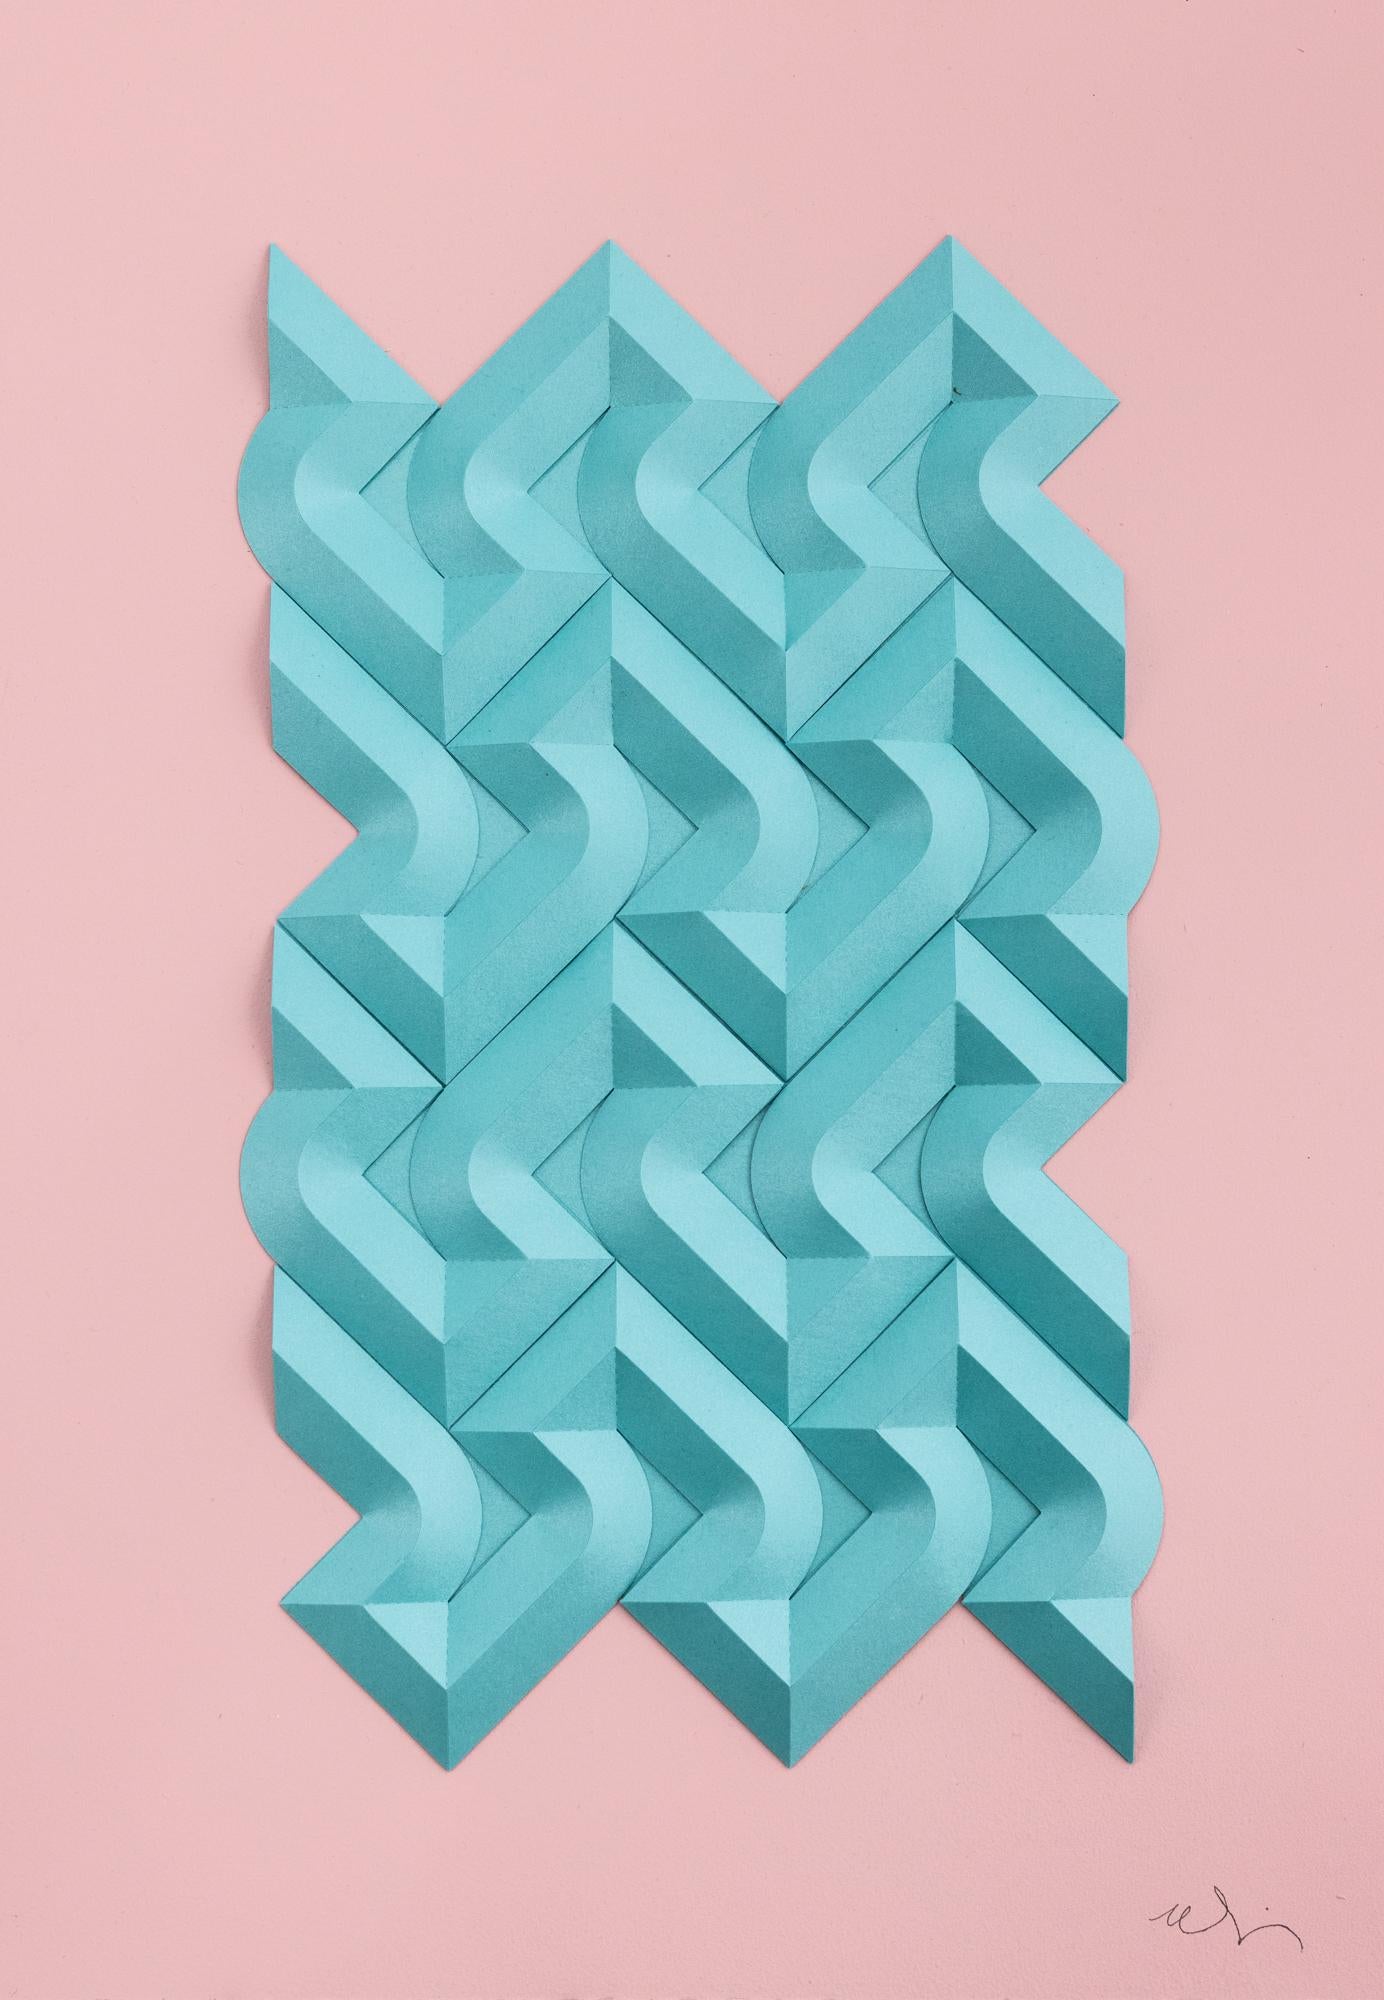 "S&S&S&S 4 in Iridescent Aquamarine on Pink", Folded Paper, Abstract Patterns - Art by Matt Shlian